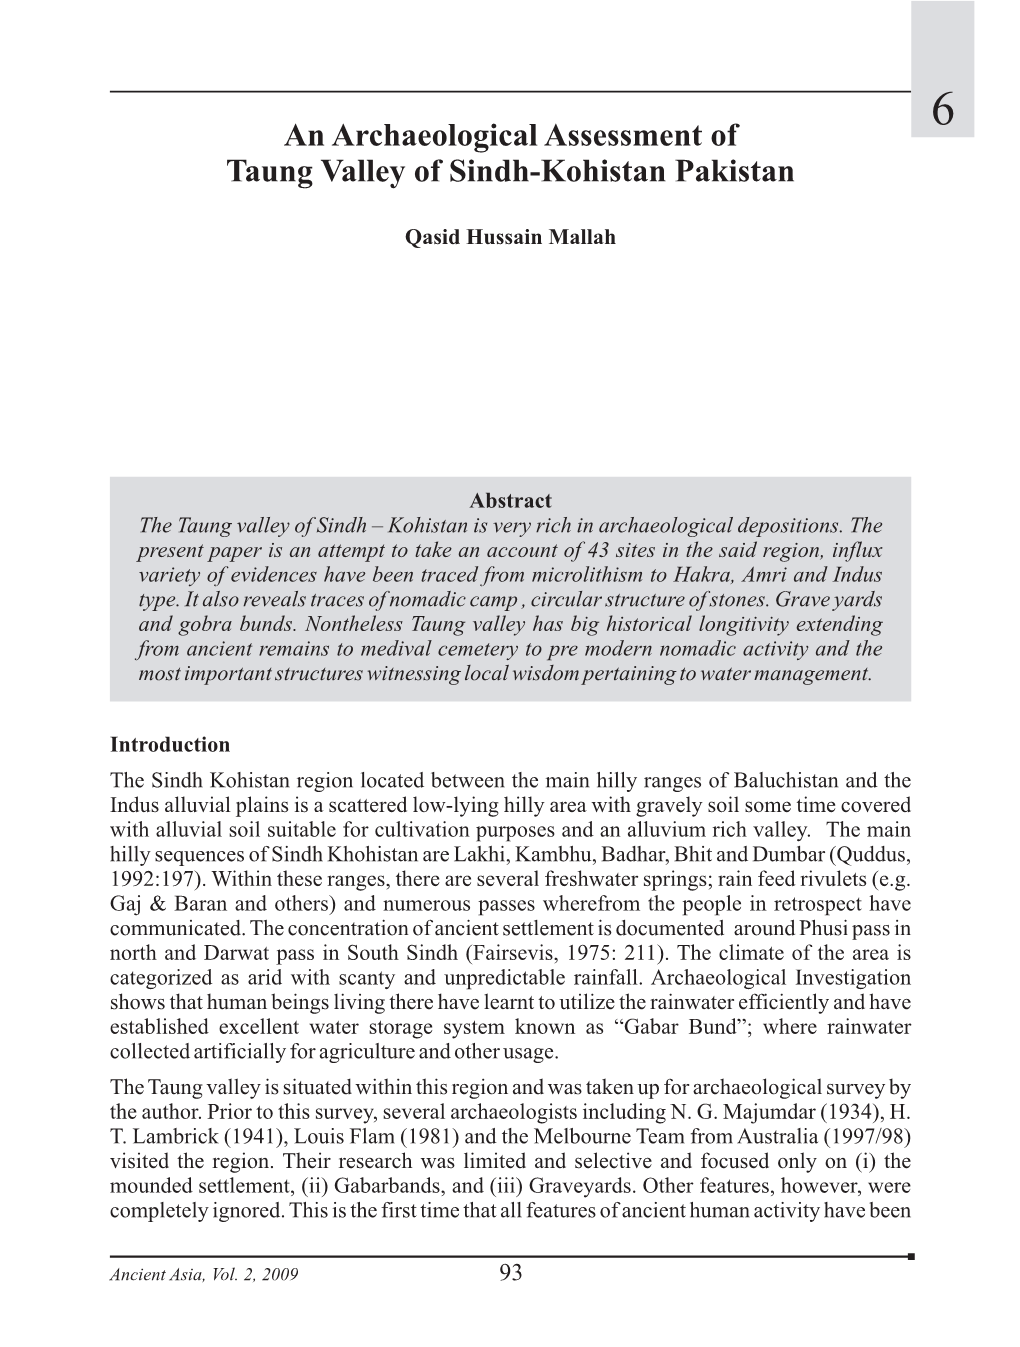 An Archaeological Assessment of Taung Valley of Sindh-Kohistan Pakistan